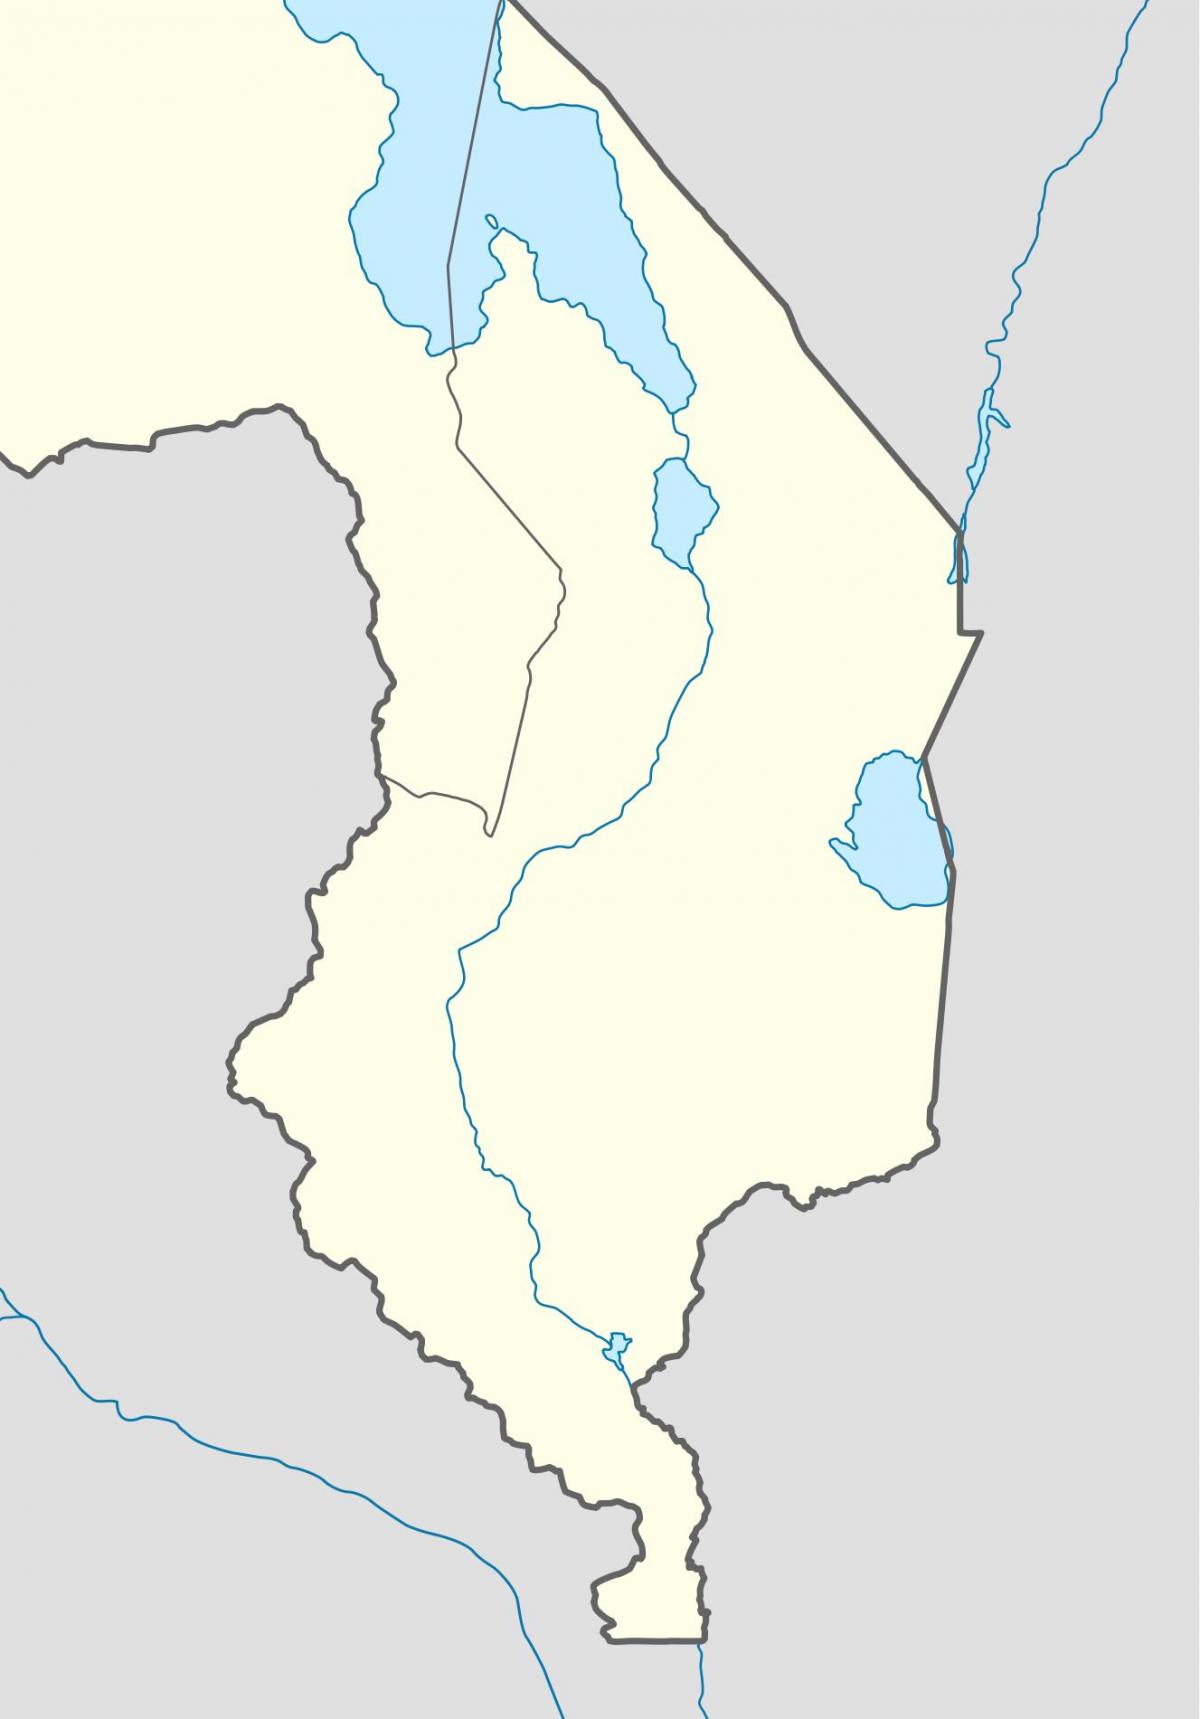 map of Malawi river